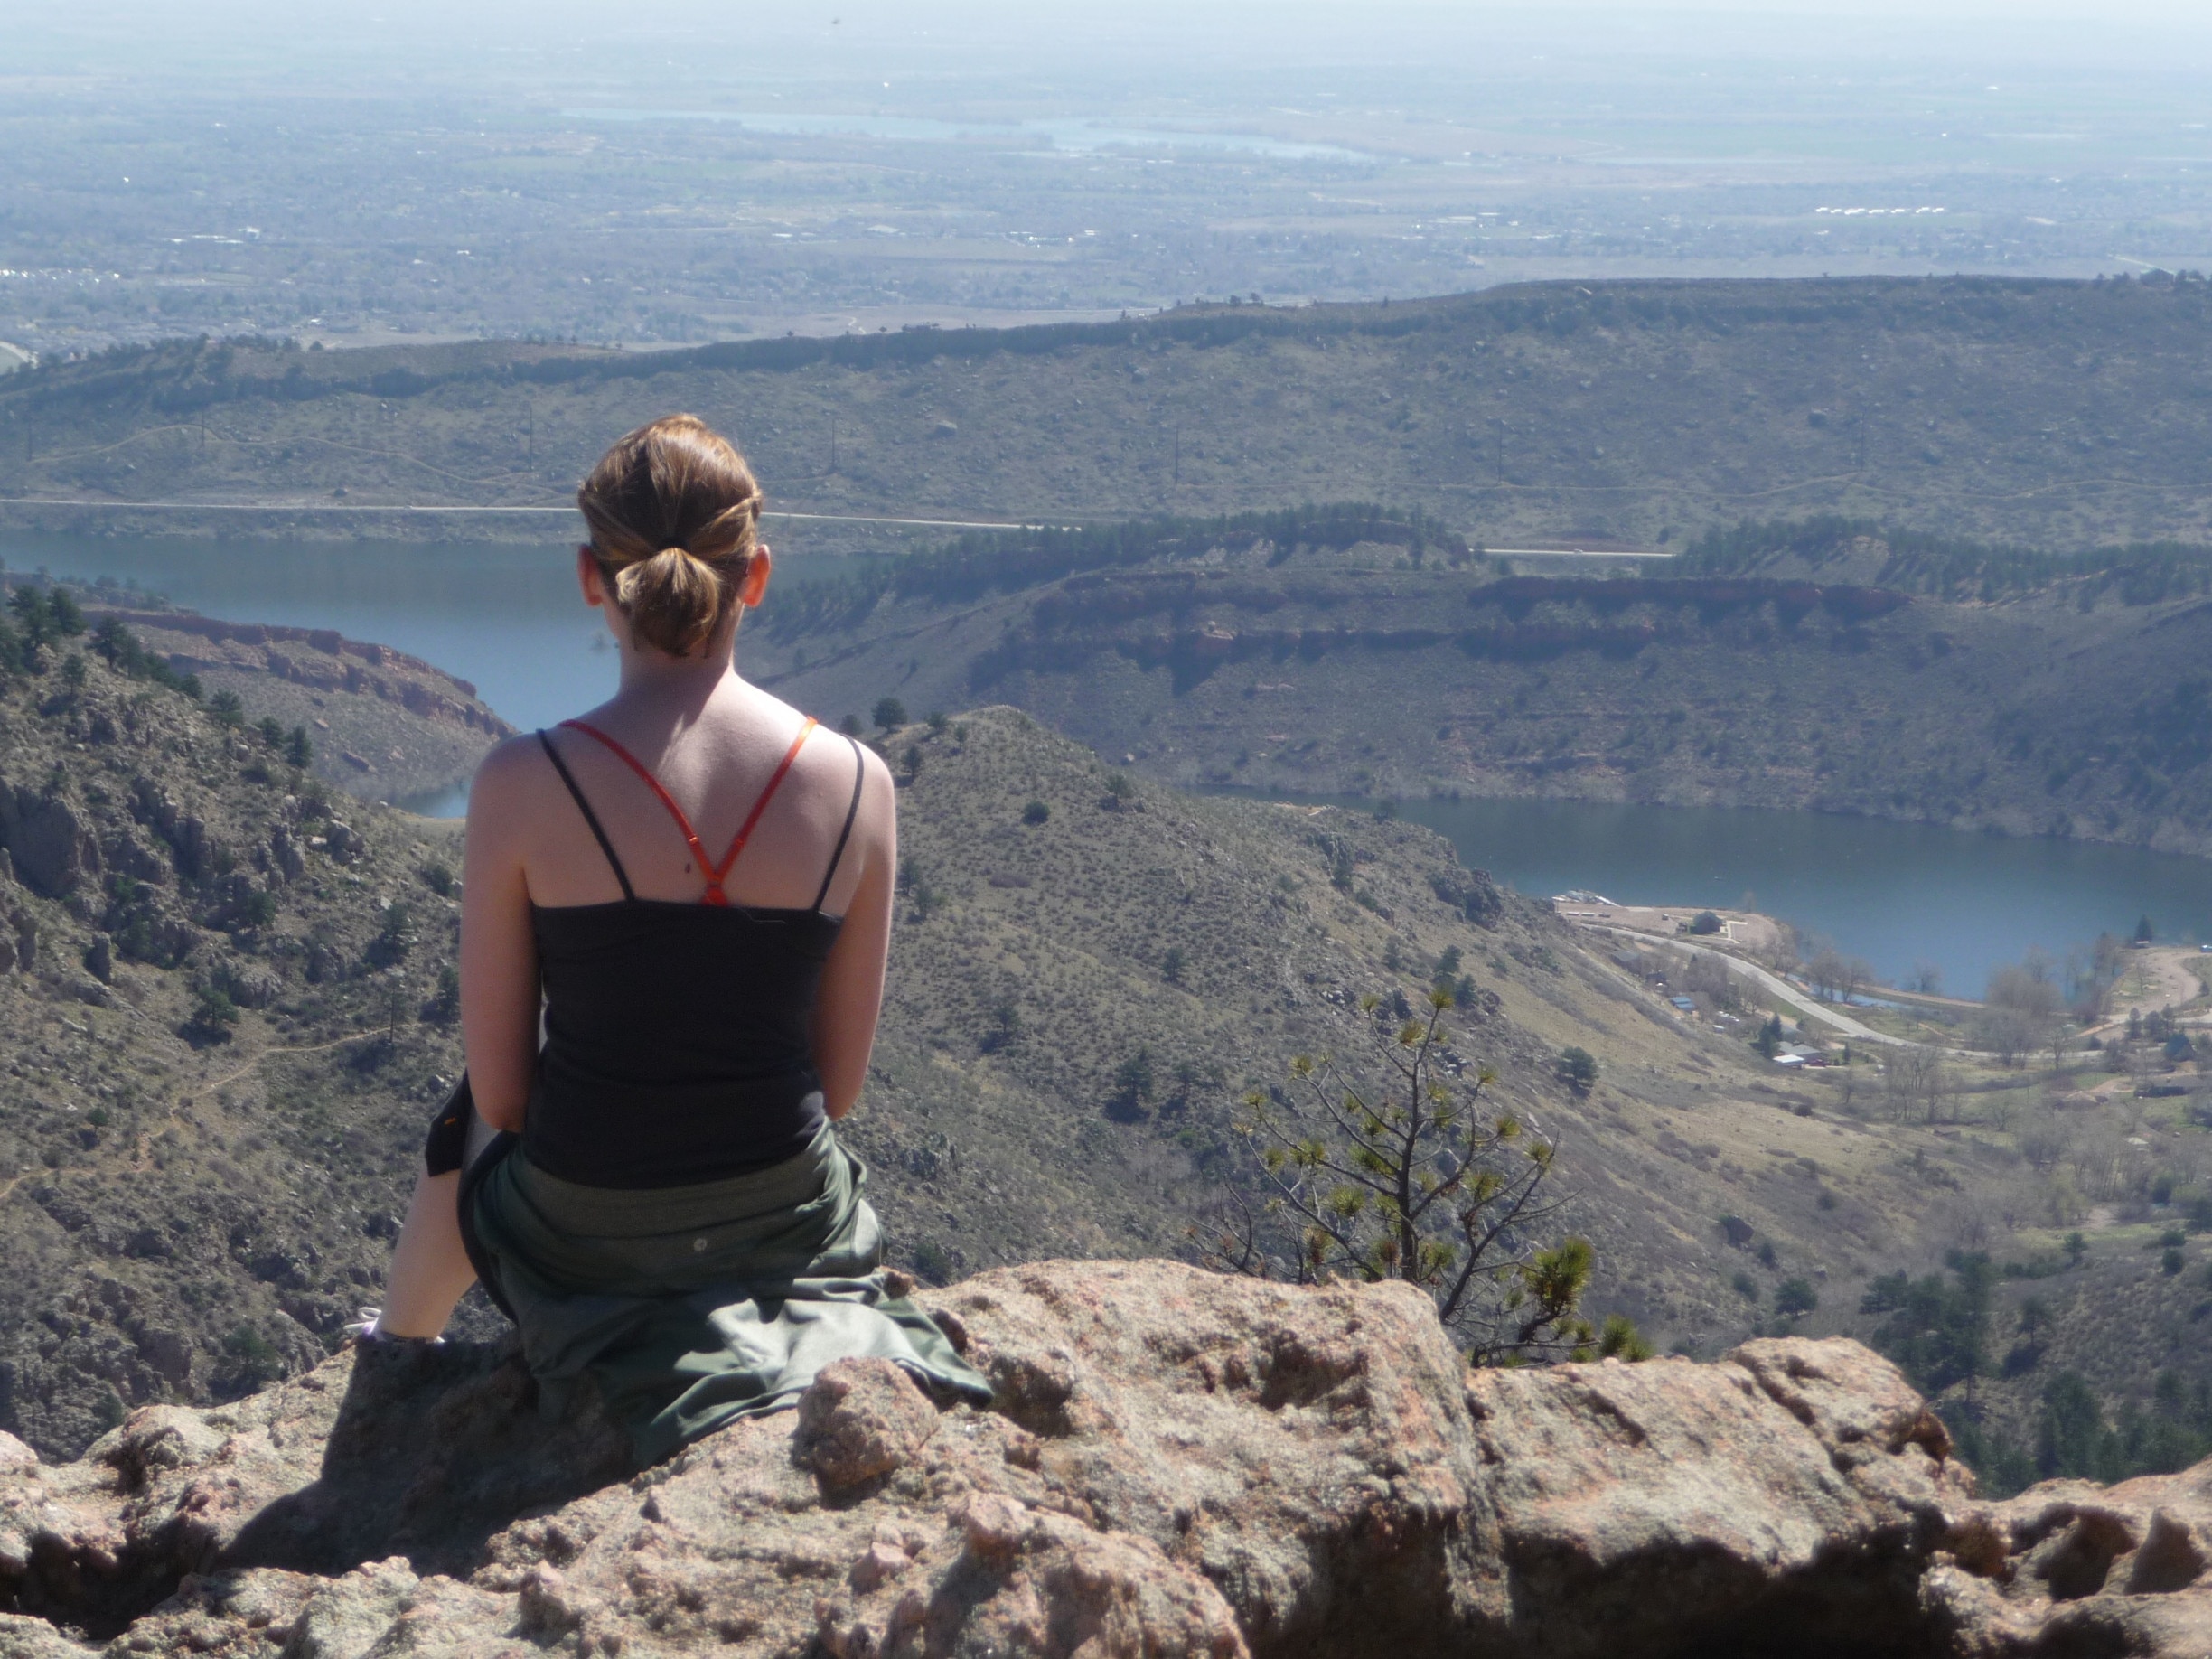 Taking in the view.

We spent about 5 hours this April hiking Horsetooth Mountain Park with our dog, Loki, and I had the sunburn to prove it... Still count this as one of my top travel experiences so far.

#hiking #zen